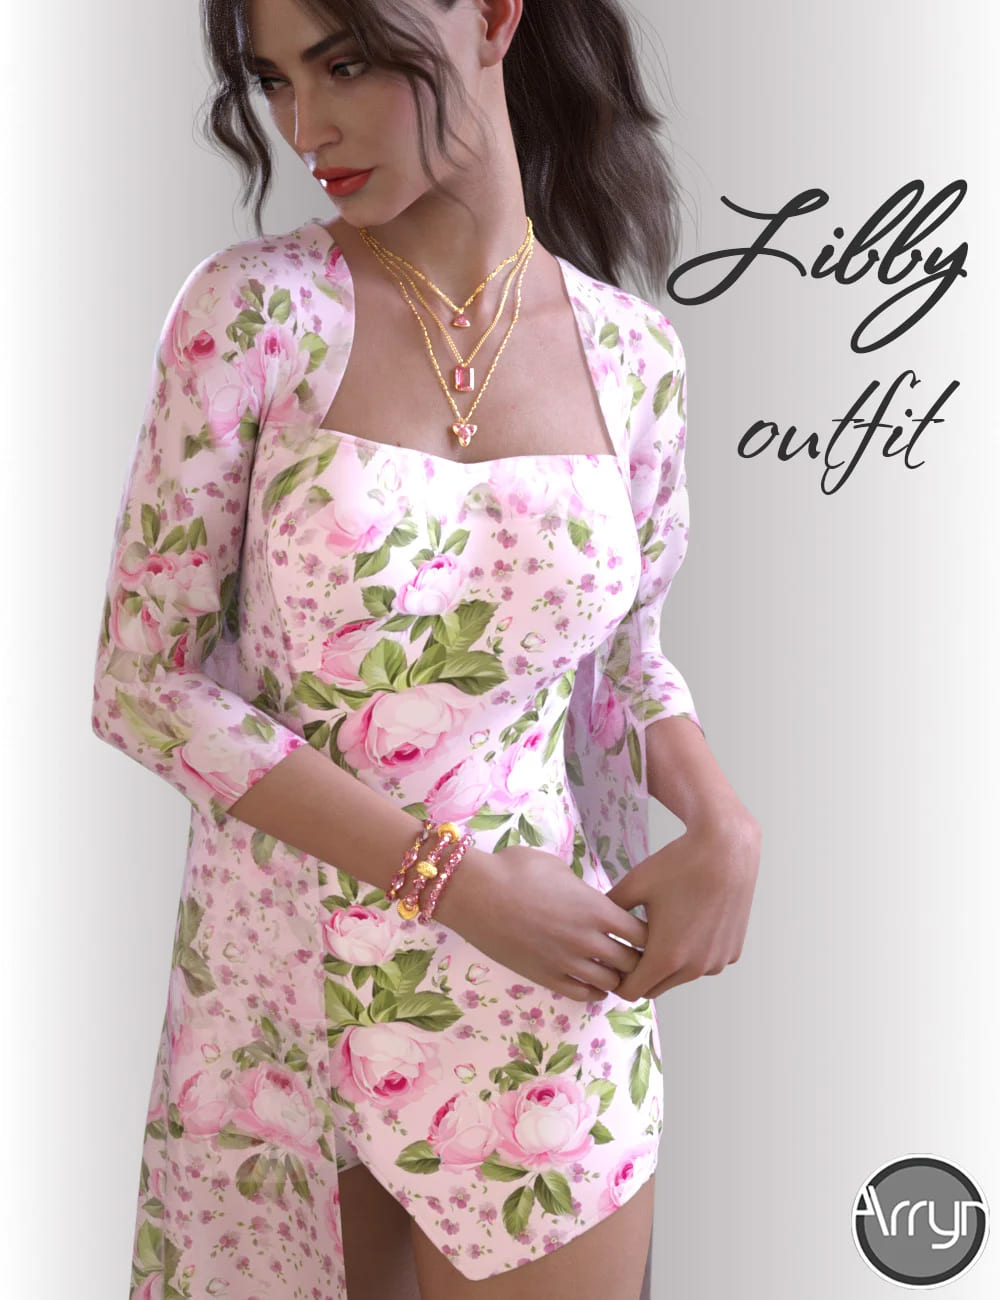 dForce Libby Holiday Outfit for Genesis 8 Females_DAZ3D下载站